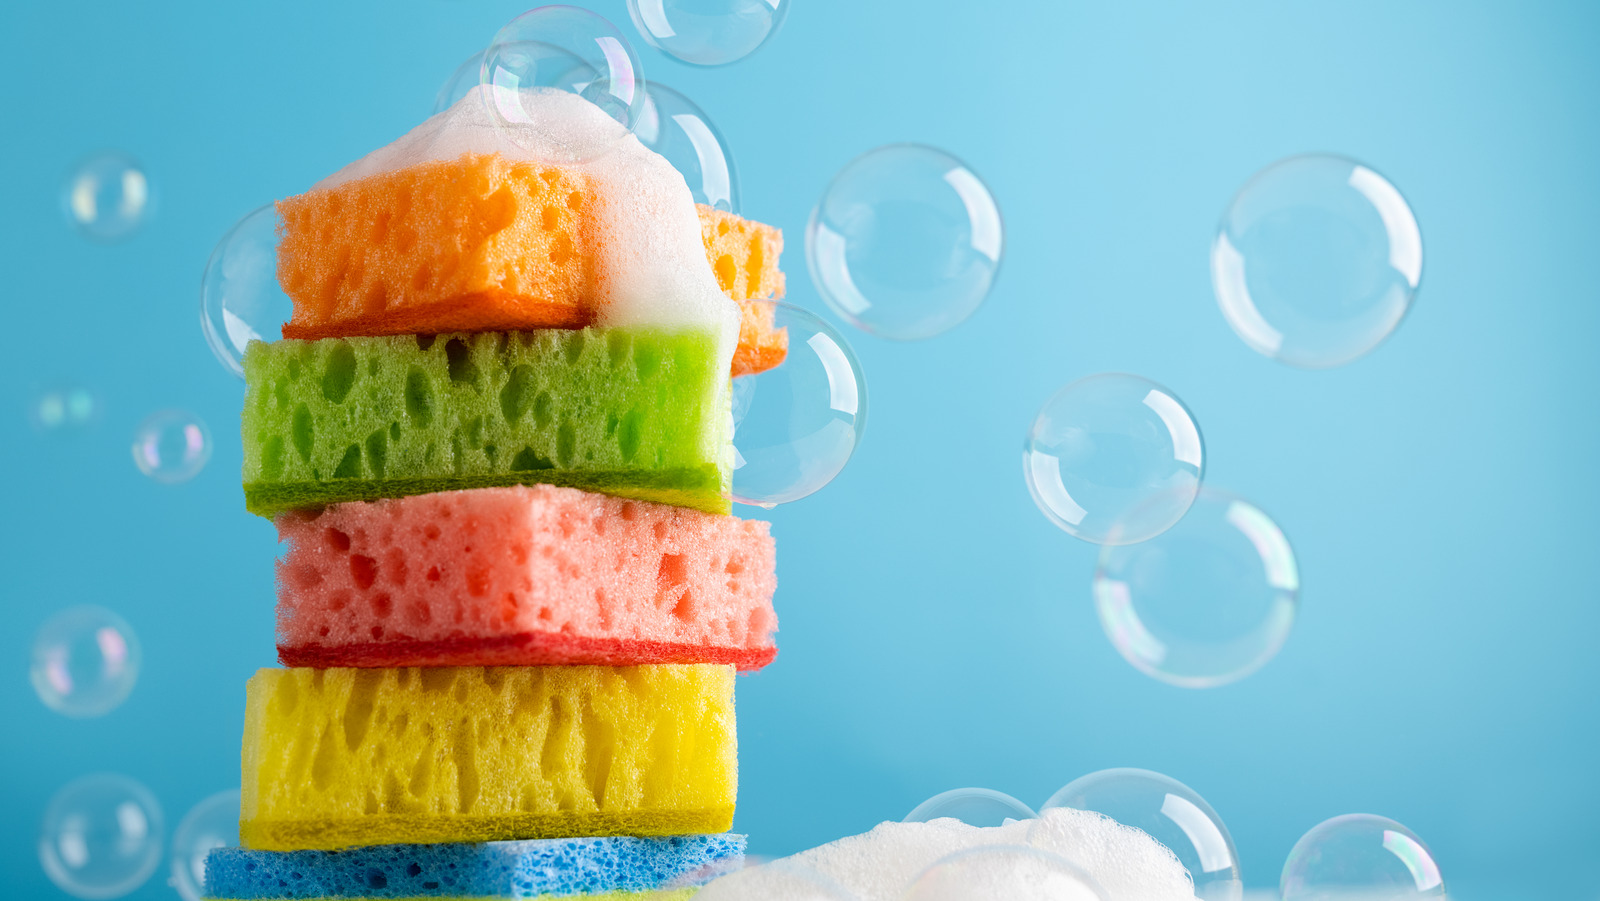 How to Clean and Sanitize a Sponge With Bleach